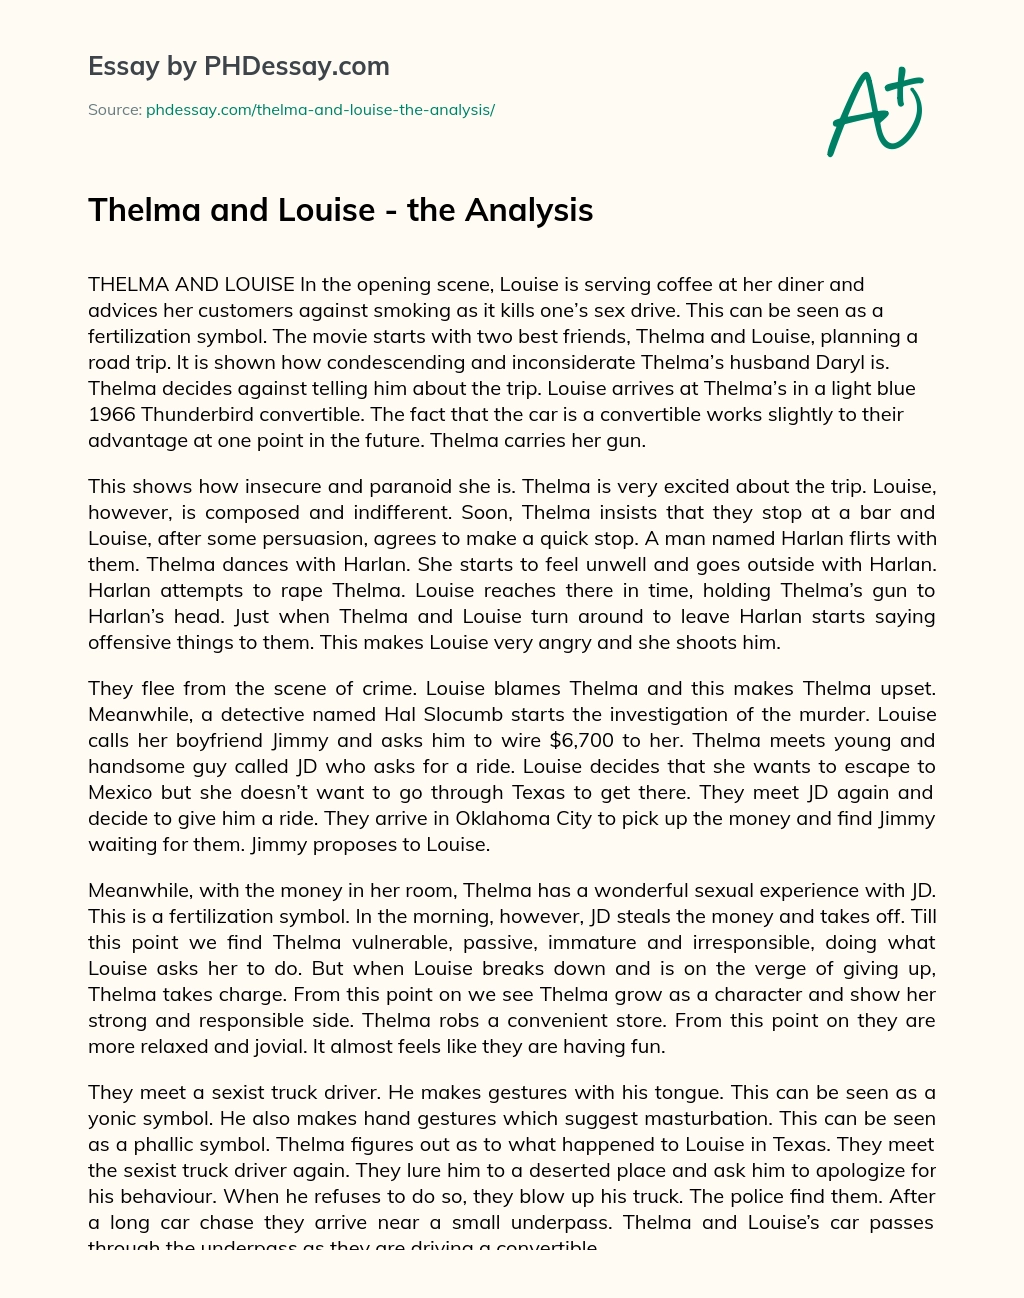 Thelma and Louise – the Analysis essay